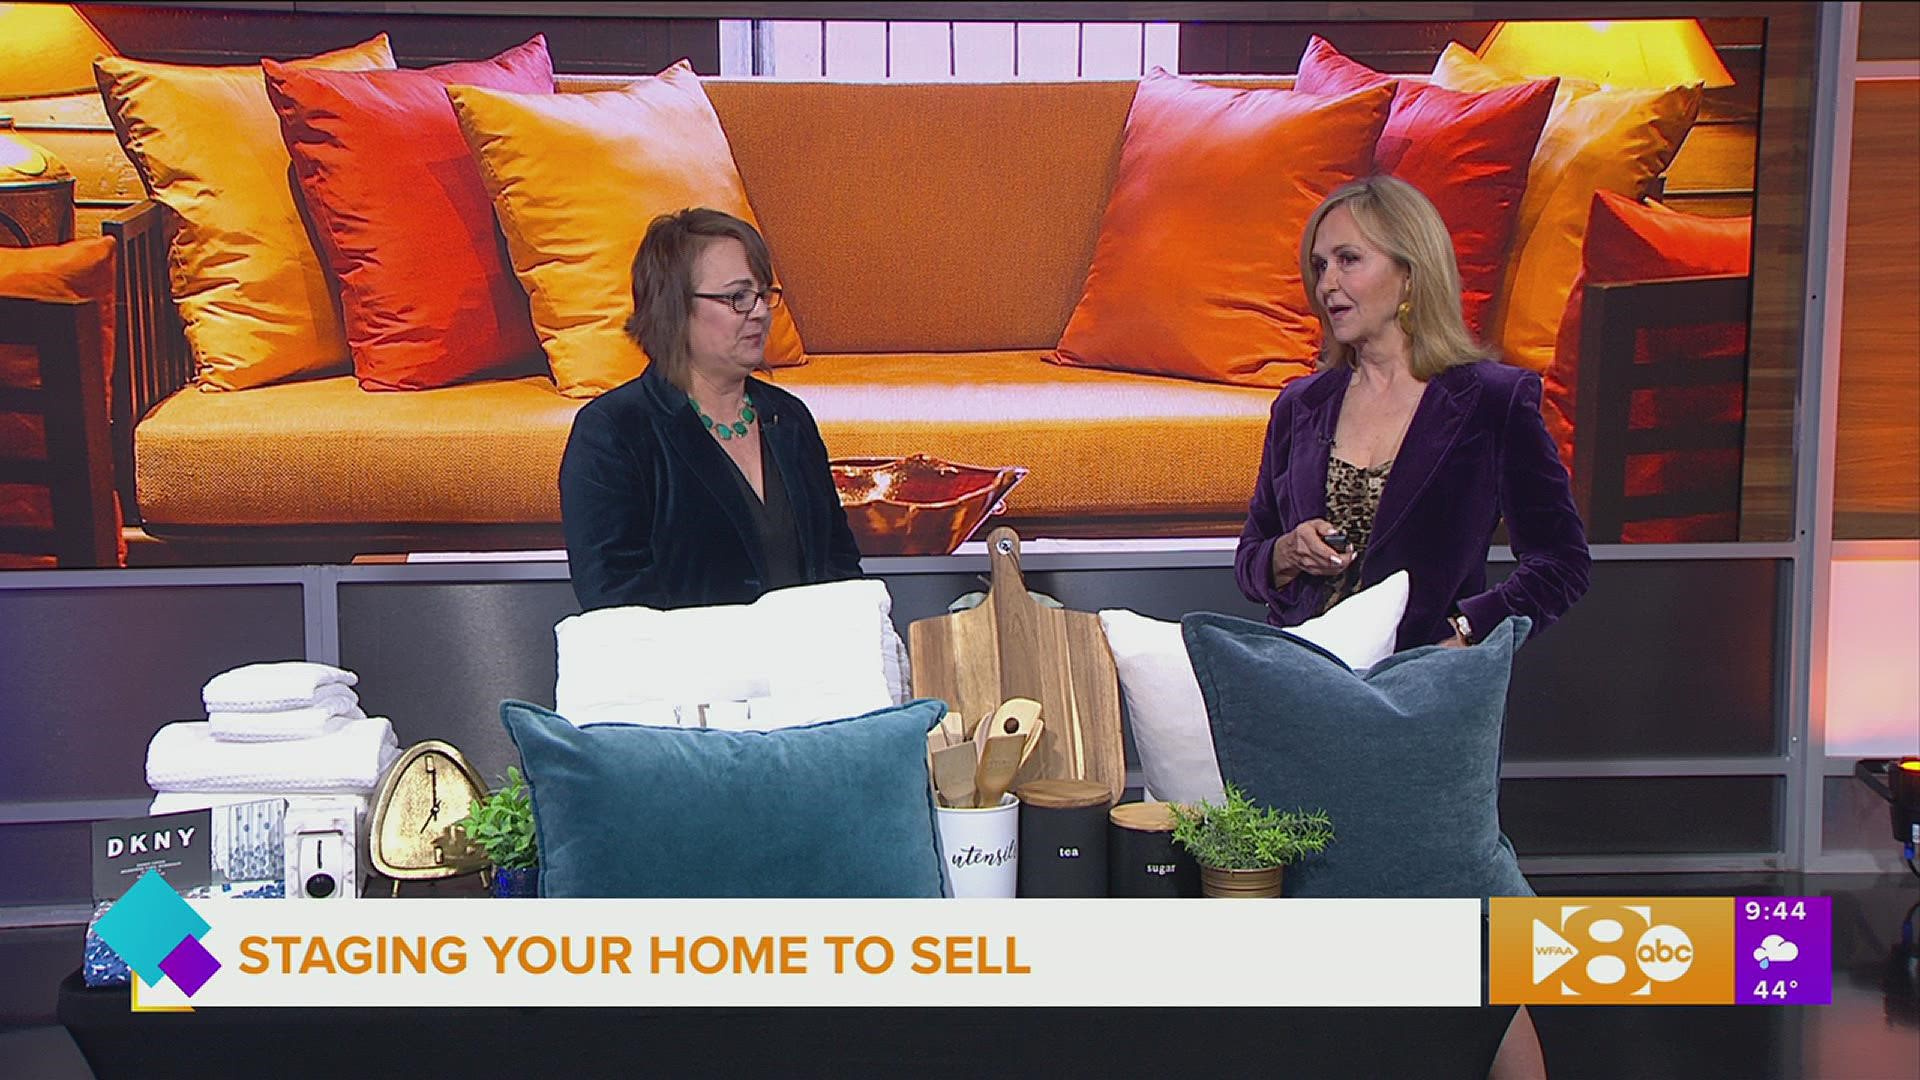 Karen Otto offers staging tips to sell your home.